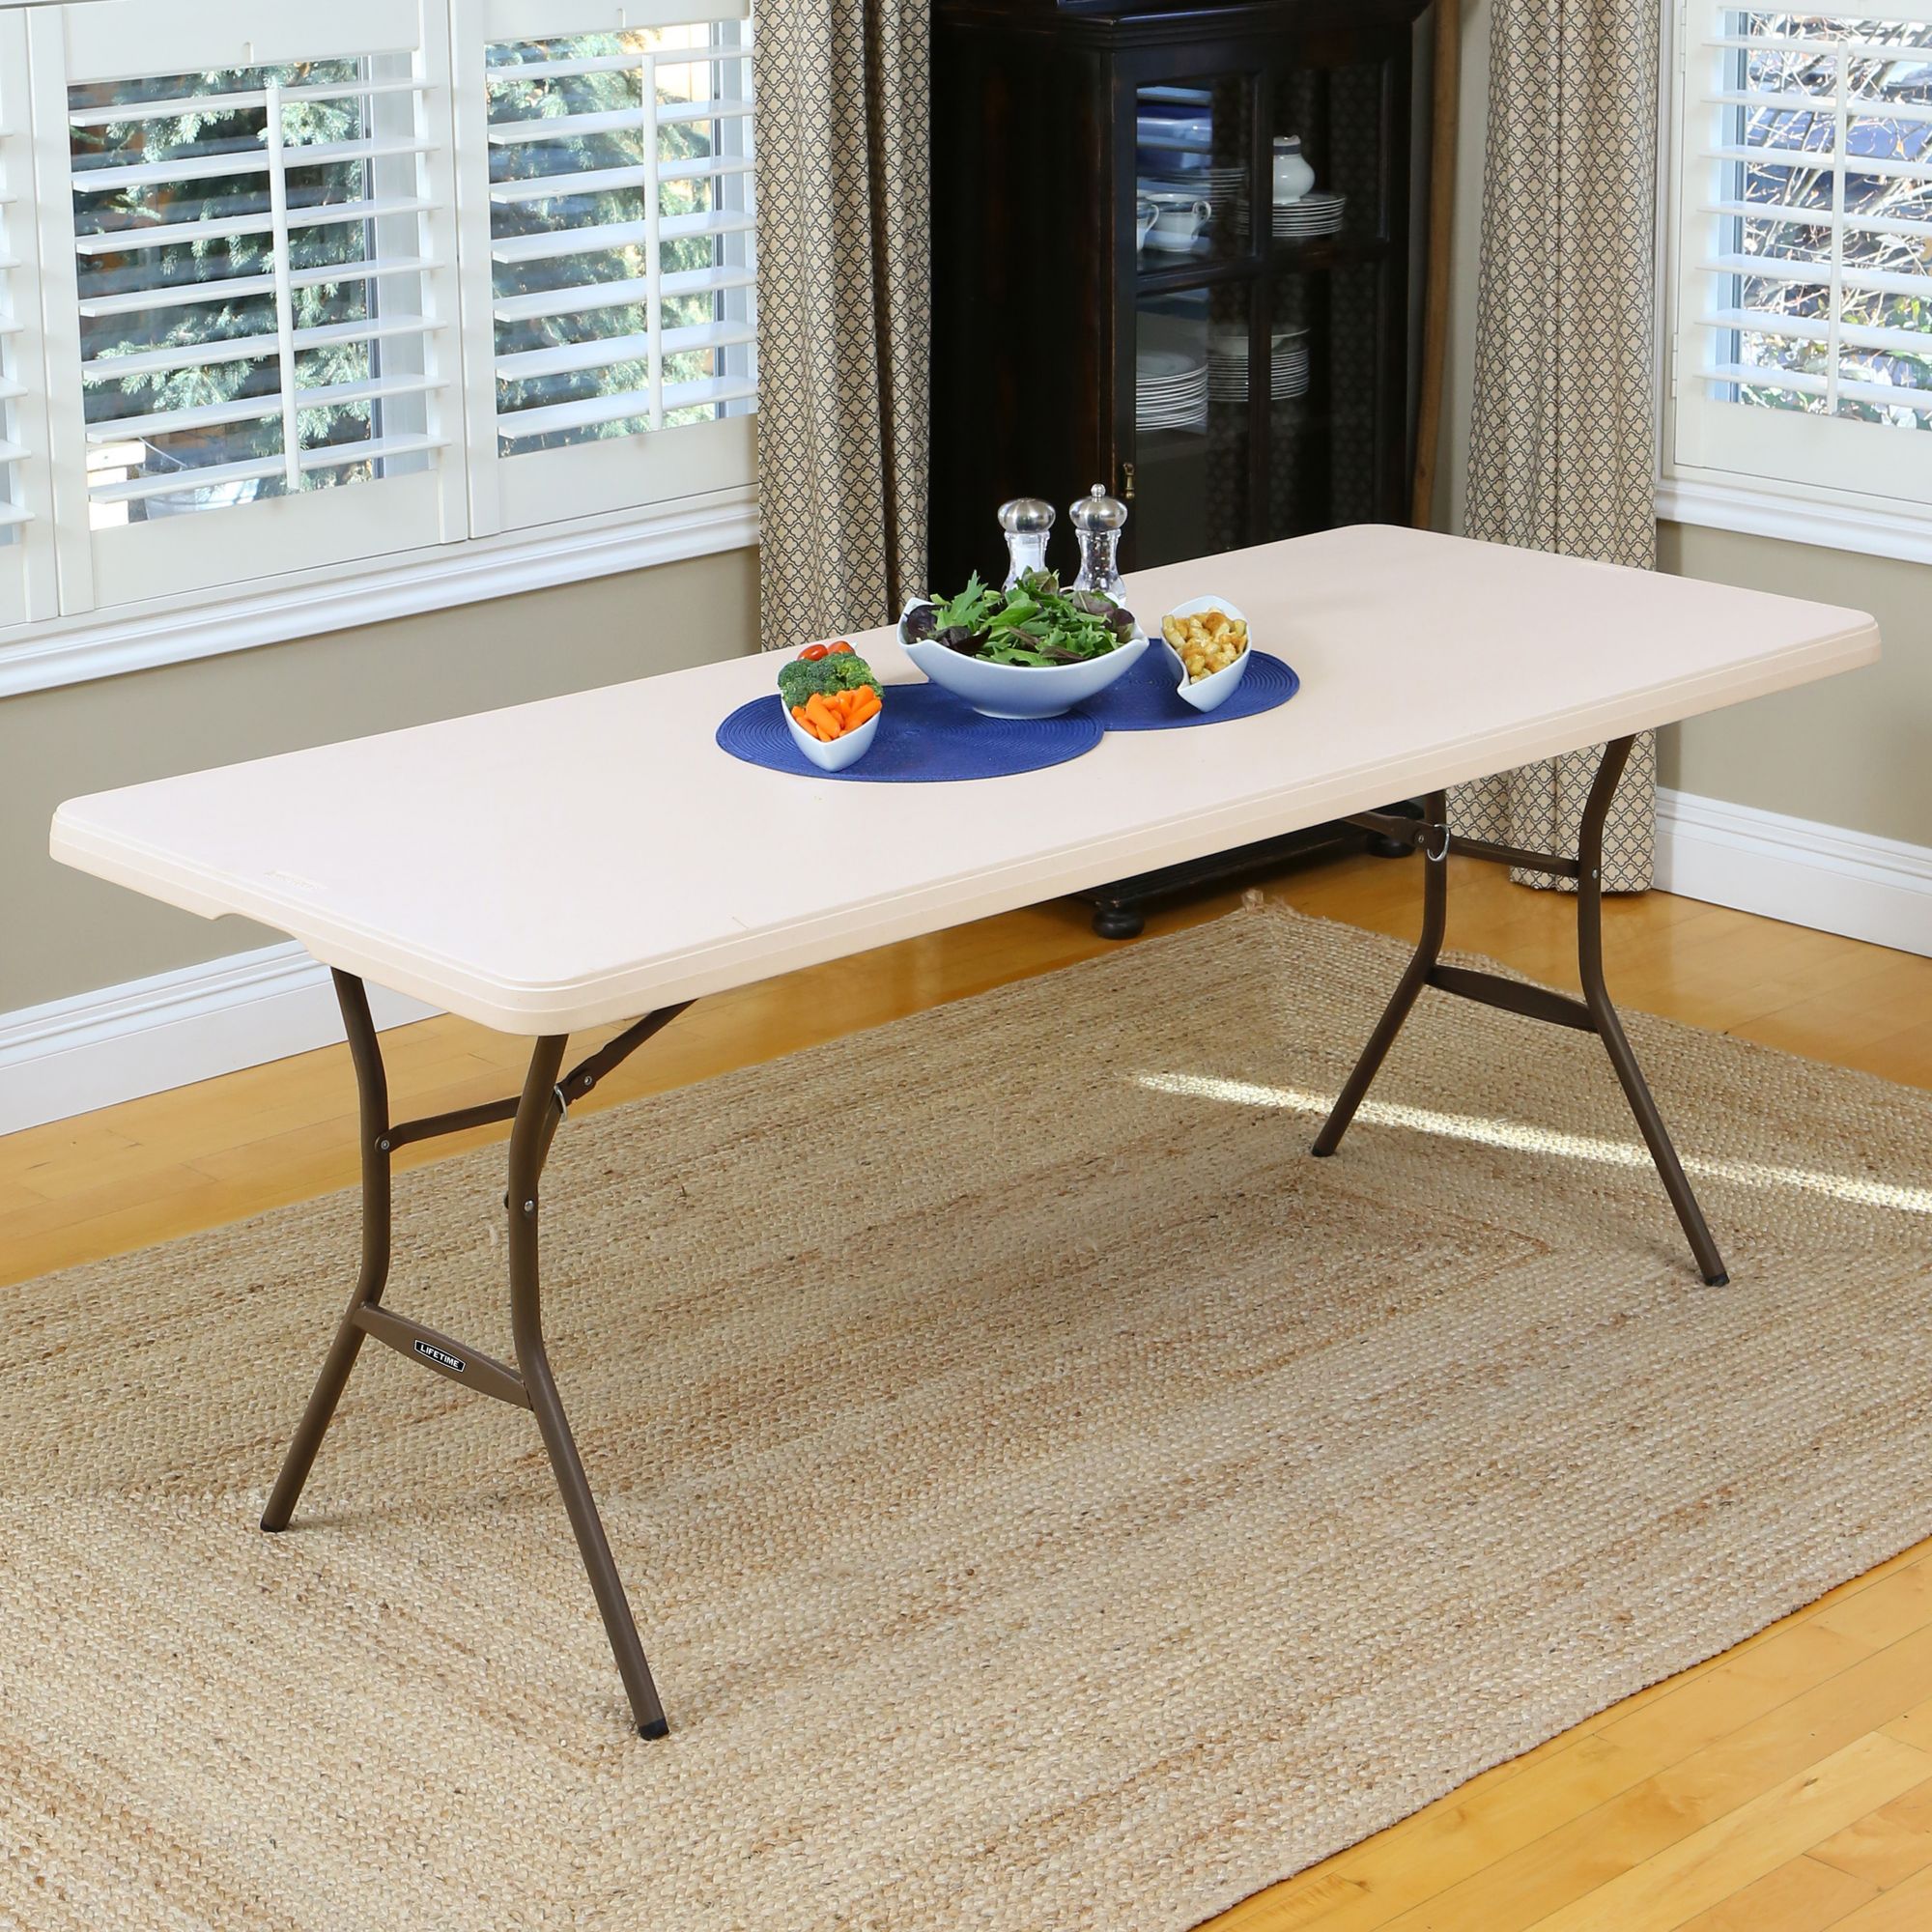 Lifetime 6 ft. Fold-in-Half Table: Almond 80454 - The Home Depot